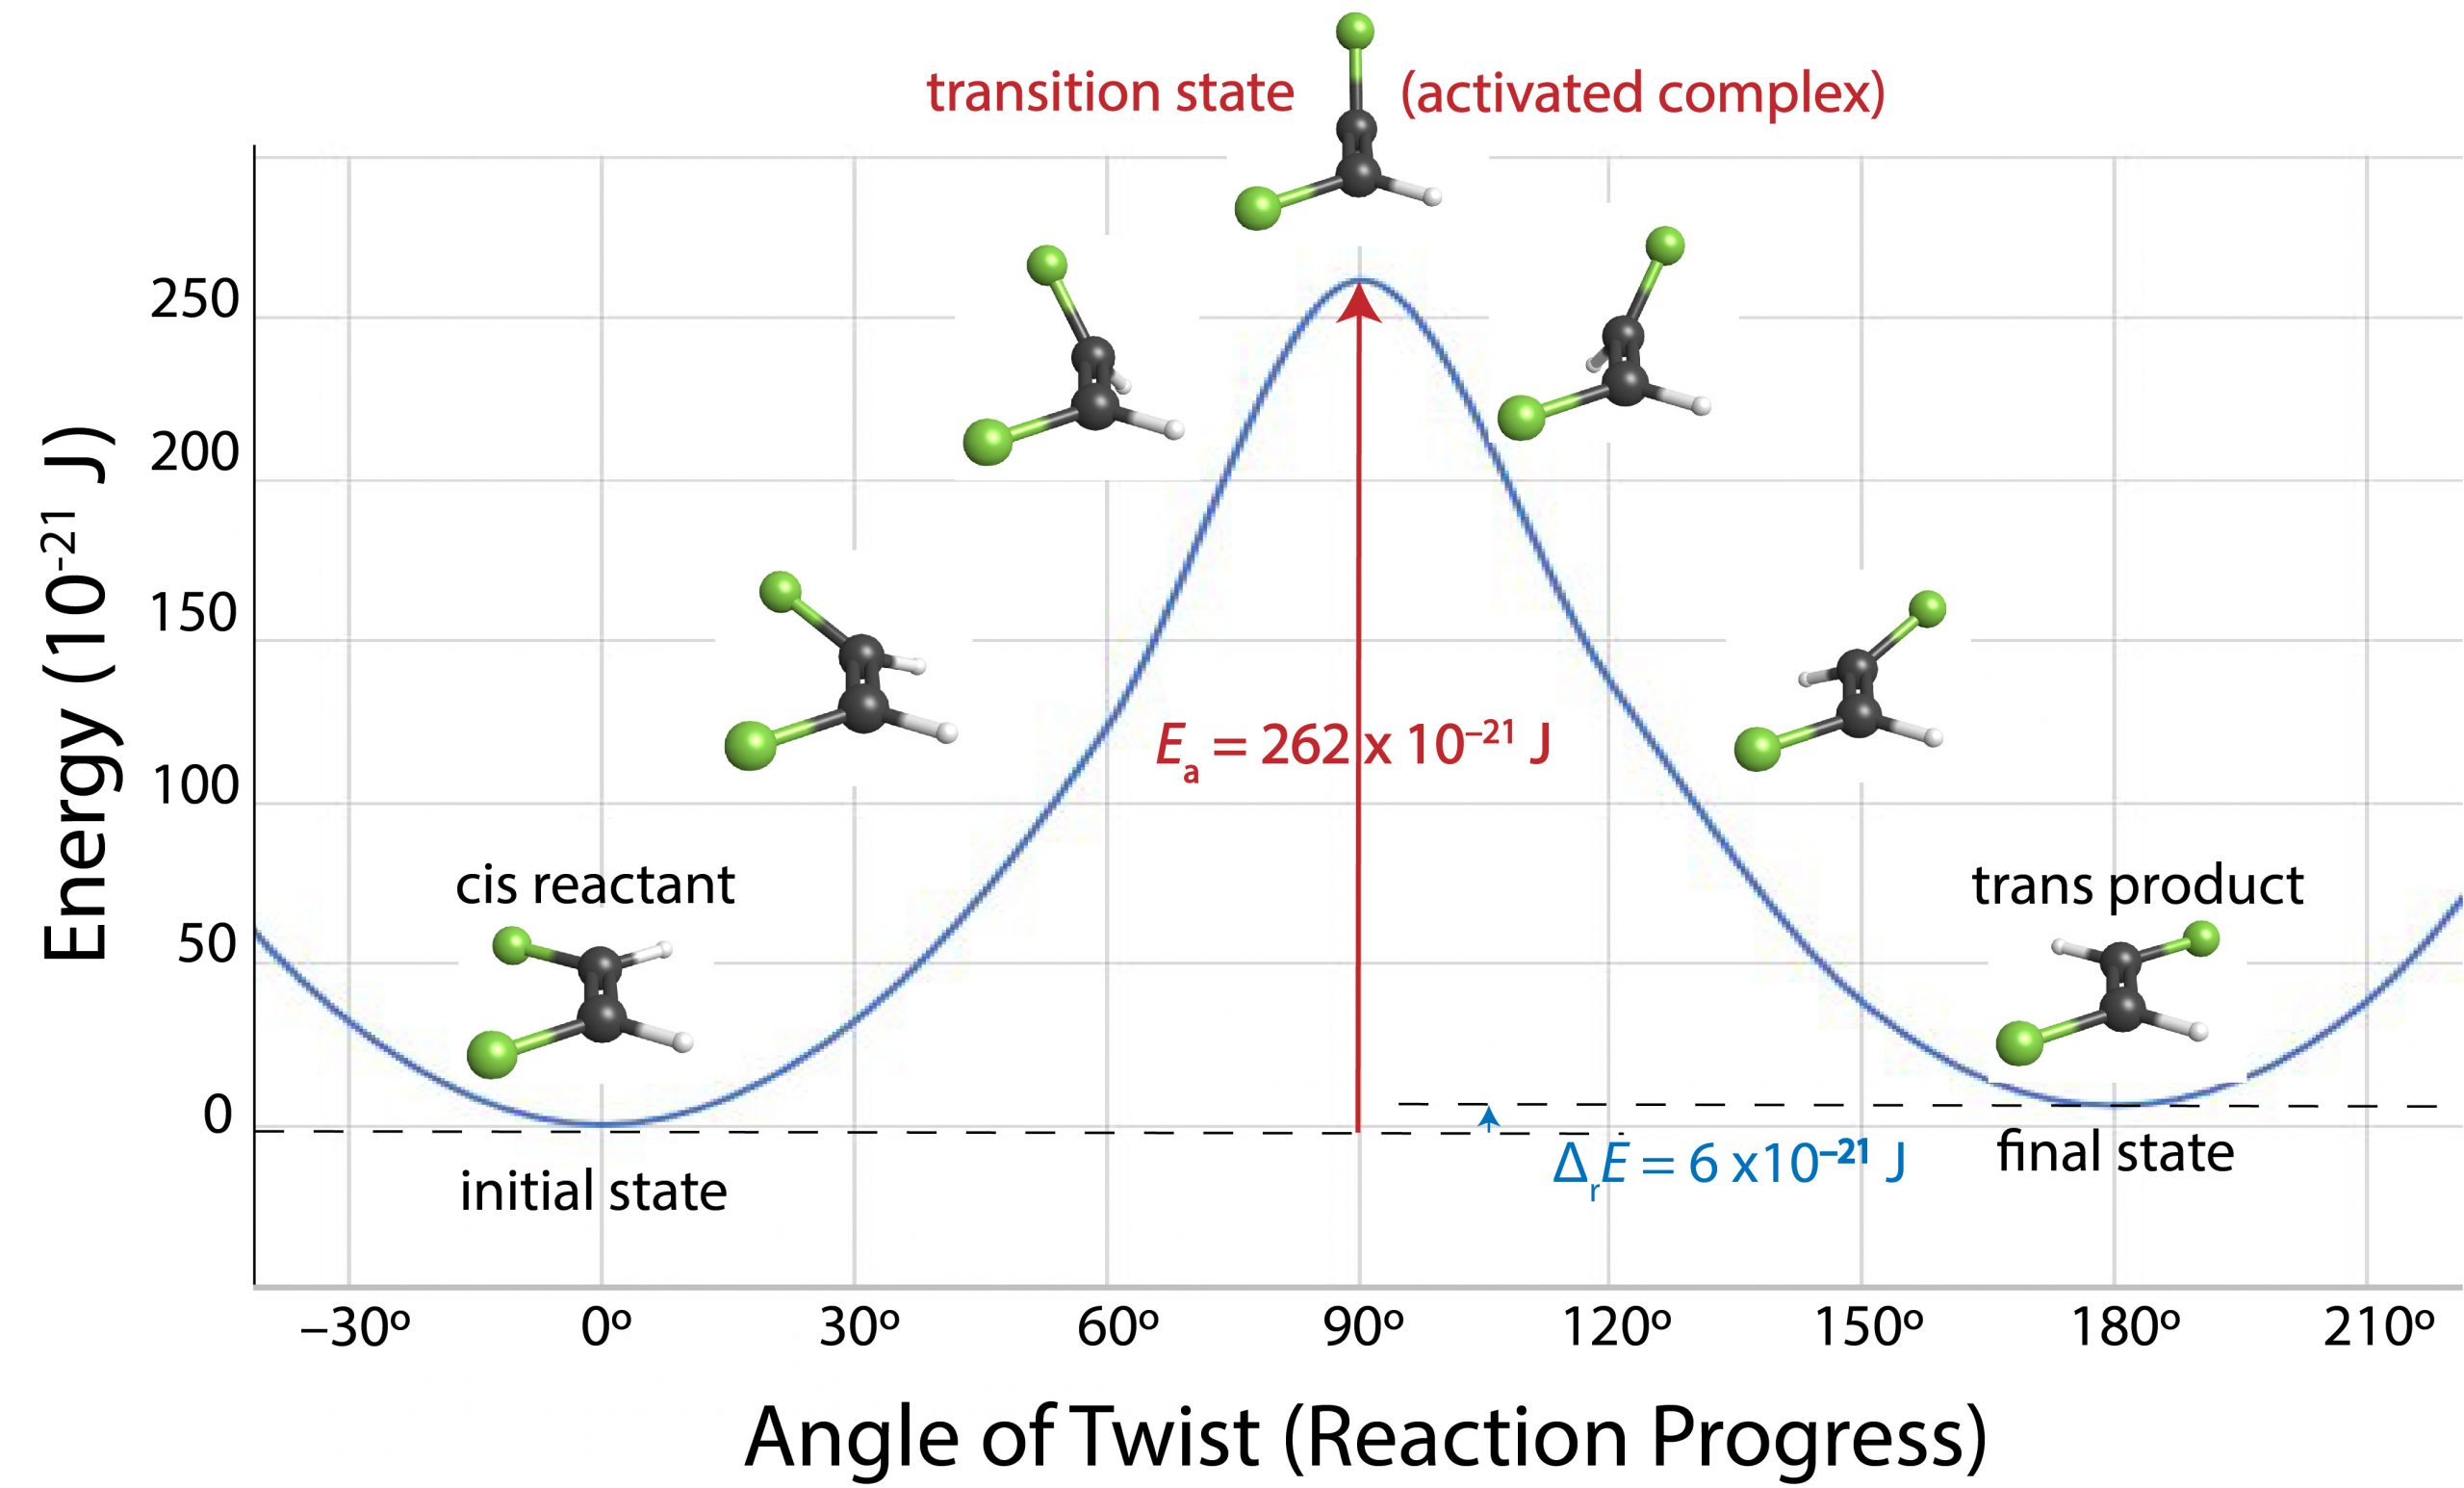 Graph of energy in units of 10^-21 joules as a function of angle of twist (reaction progress). The cis reactant has an energy level of 0. The transition state (activated complex) has an energy level of 262 x 10^-21 J. The trans product (final state) has an energy of 6 x 10^-21 J, slightly higher than the initial state.